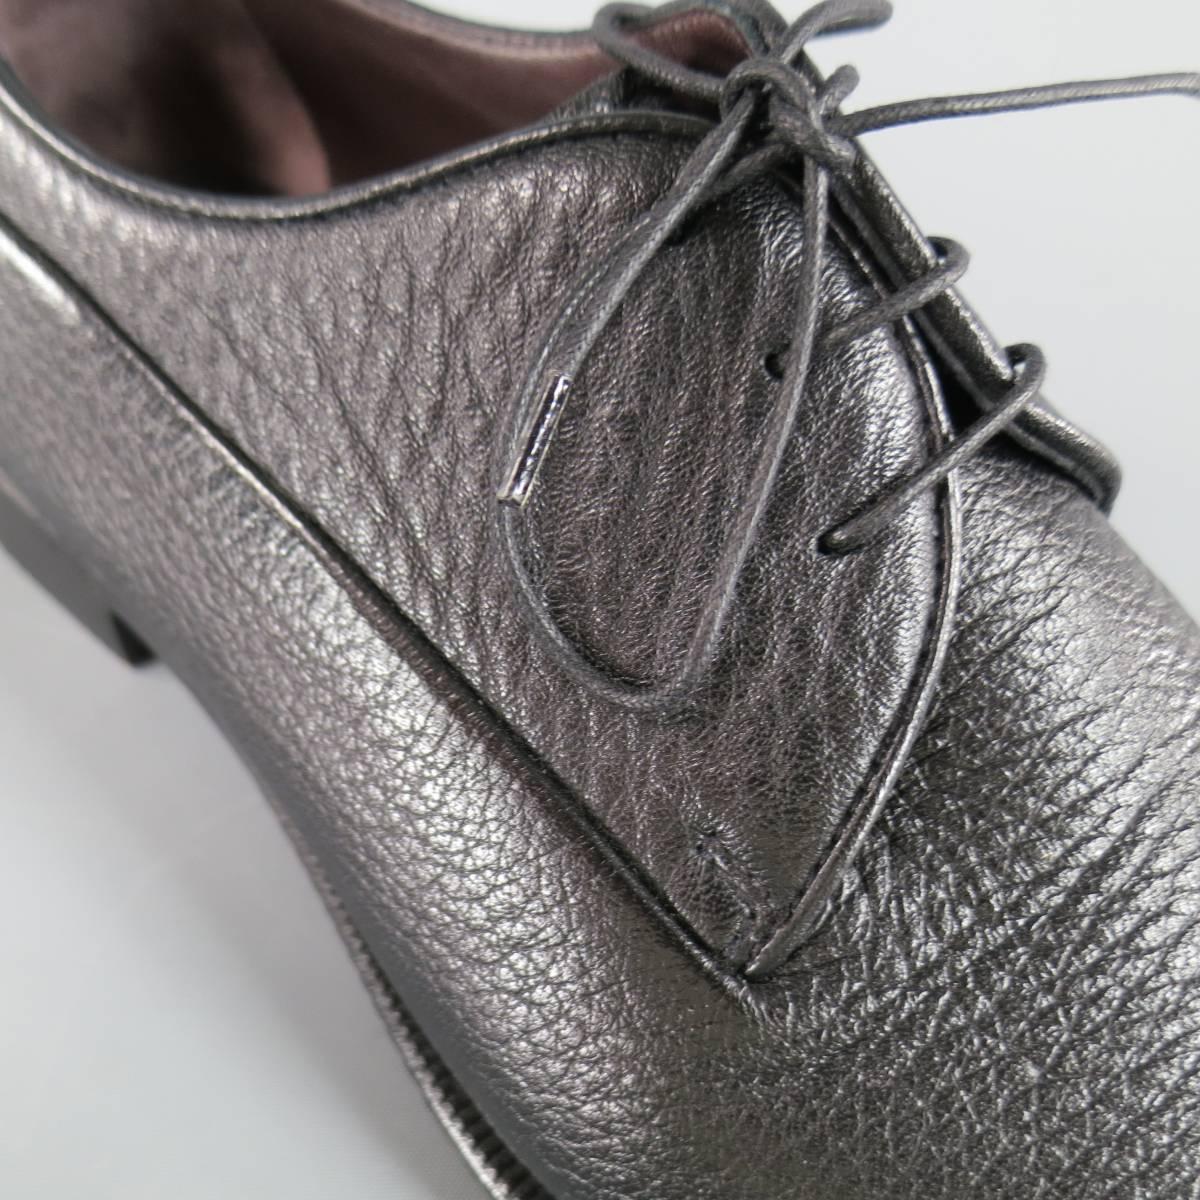 ERMENEGILDO ZEGNA Lace-Up Shoes consists of leather material in a black color tone. Designed in a round toe front, soft textured pattern with black leather sole. 
Light scratch on left shoe front. Made in Italy.
 
Good Pre-Owned Condition
Marked